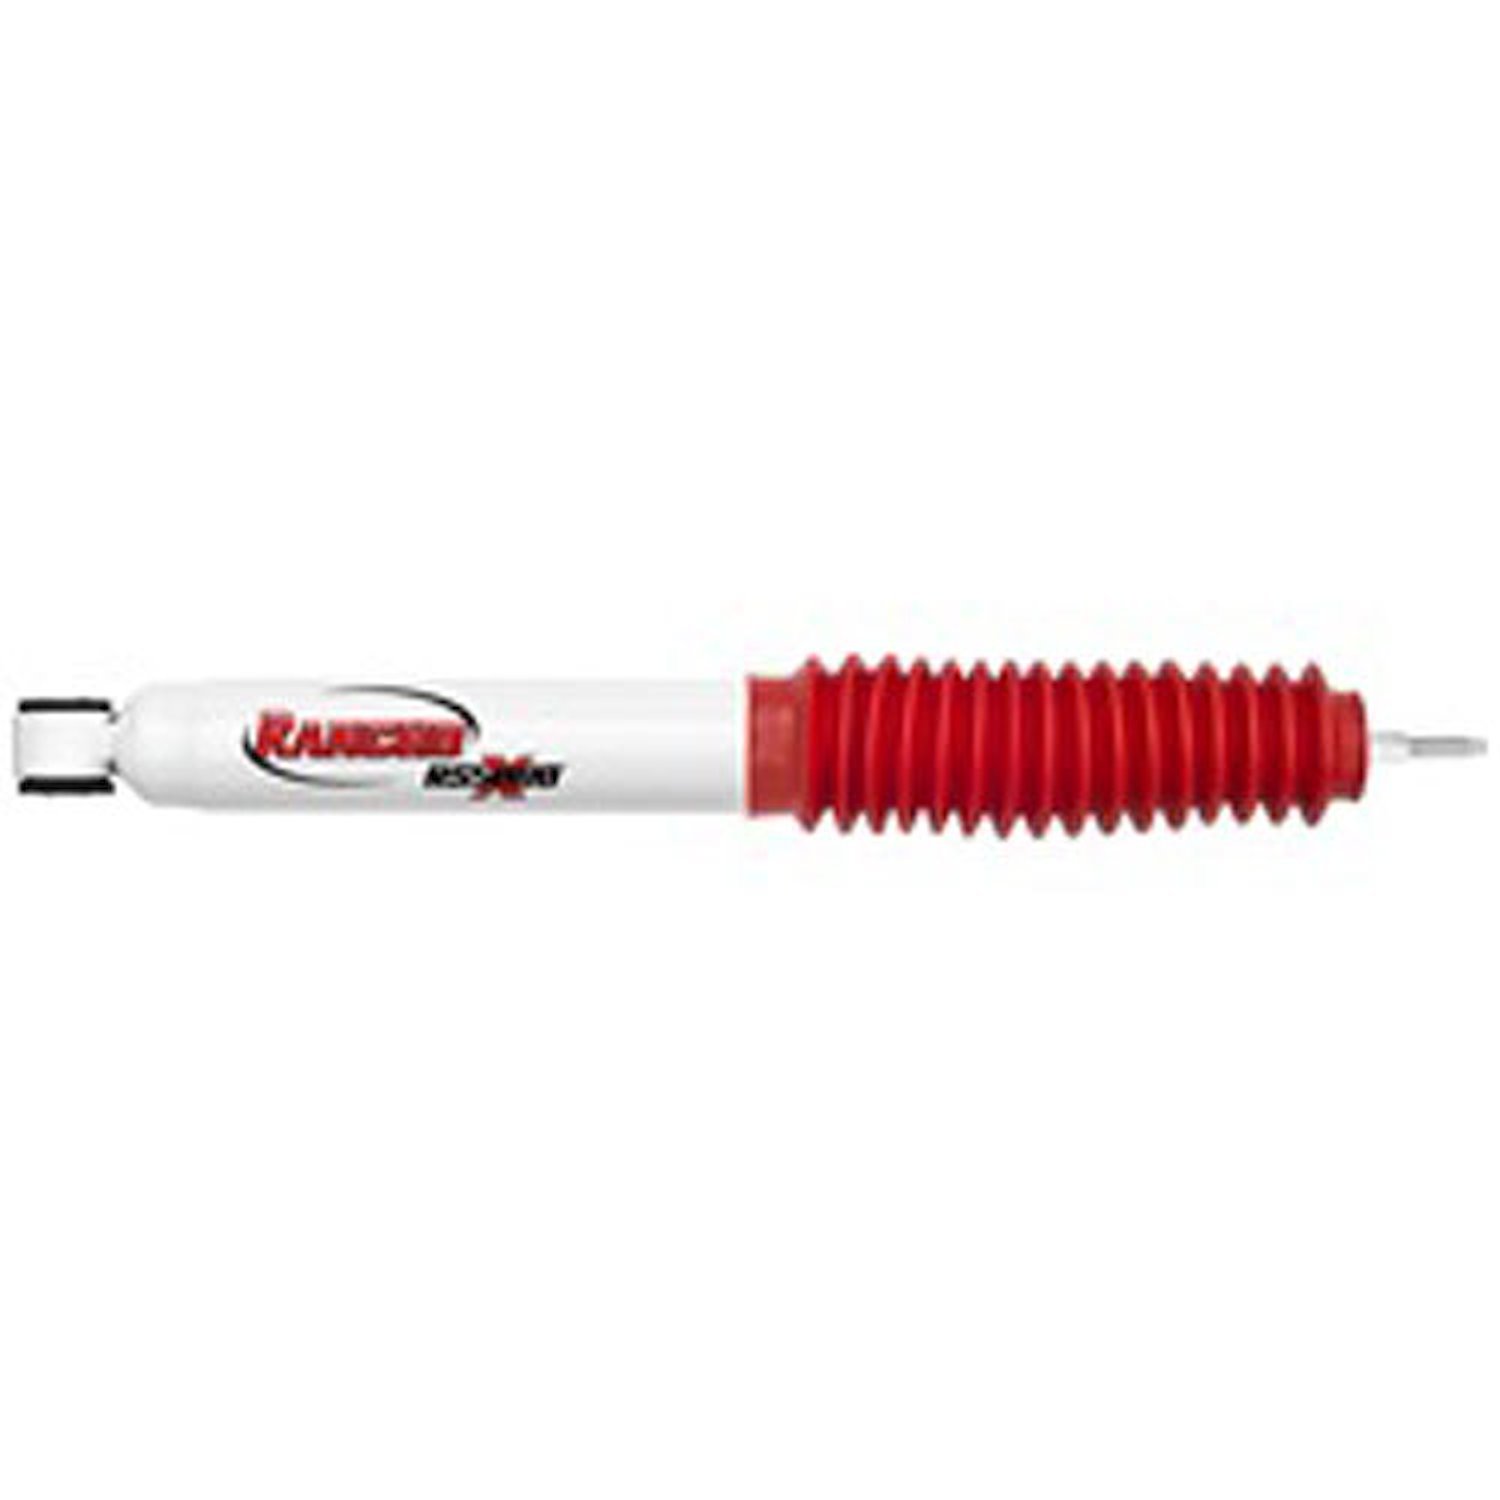 RS5000X Front Shock Absorber Fits Ford F250 and Dodge Ram 2500 Pickups